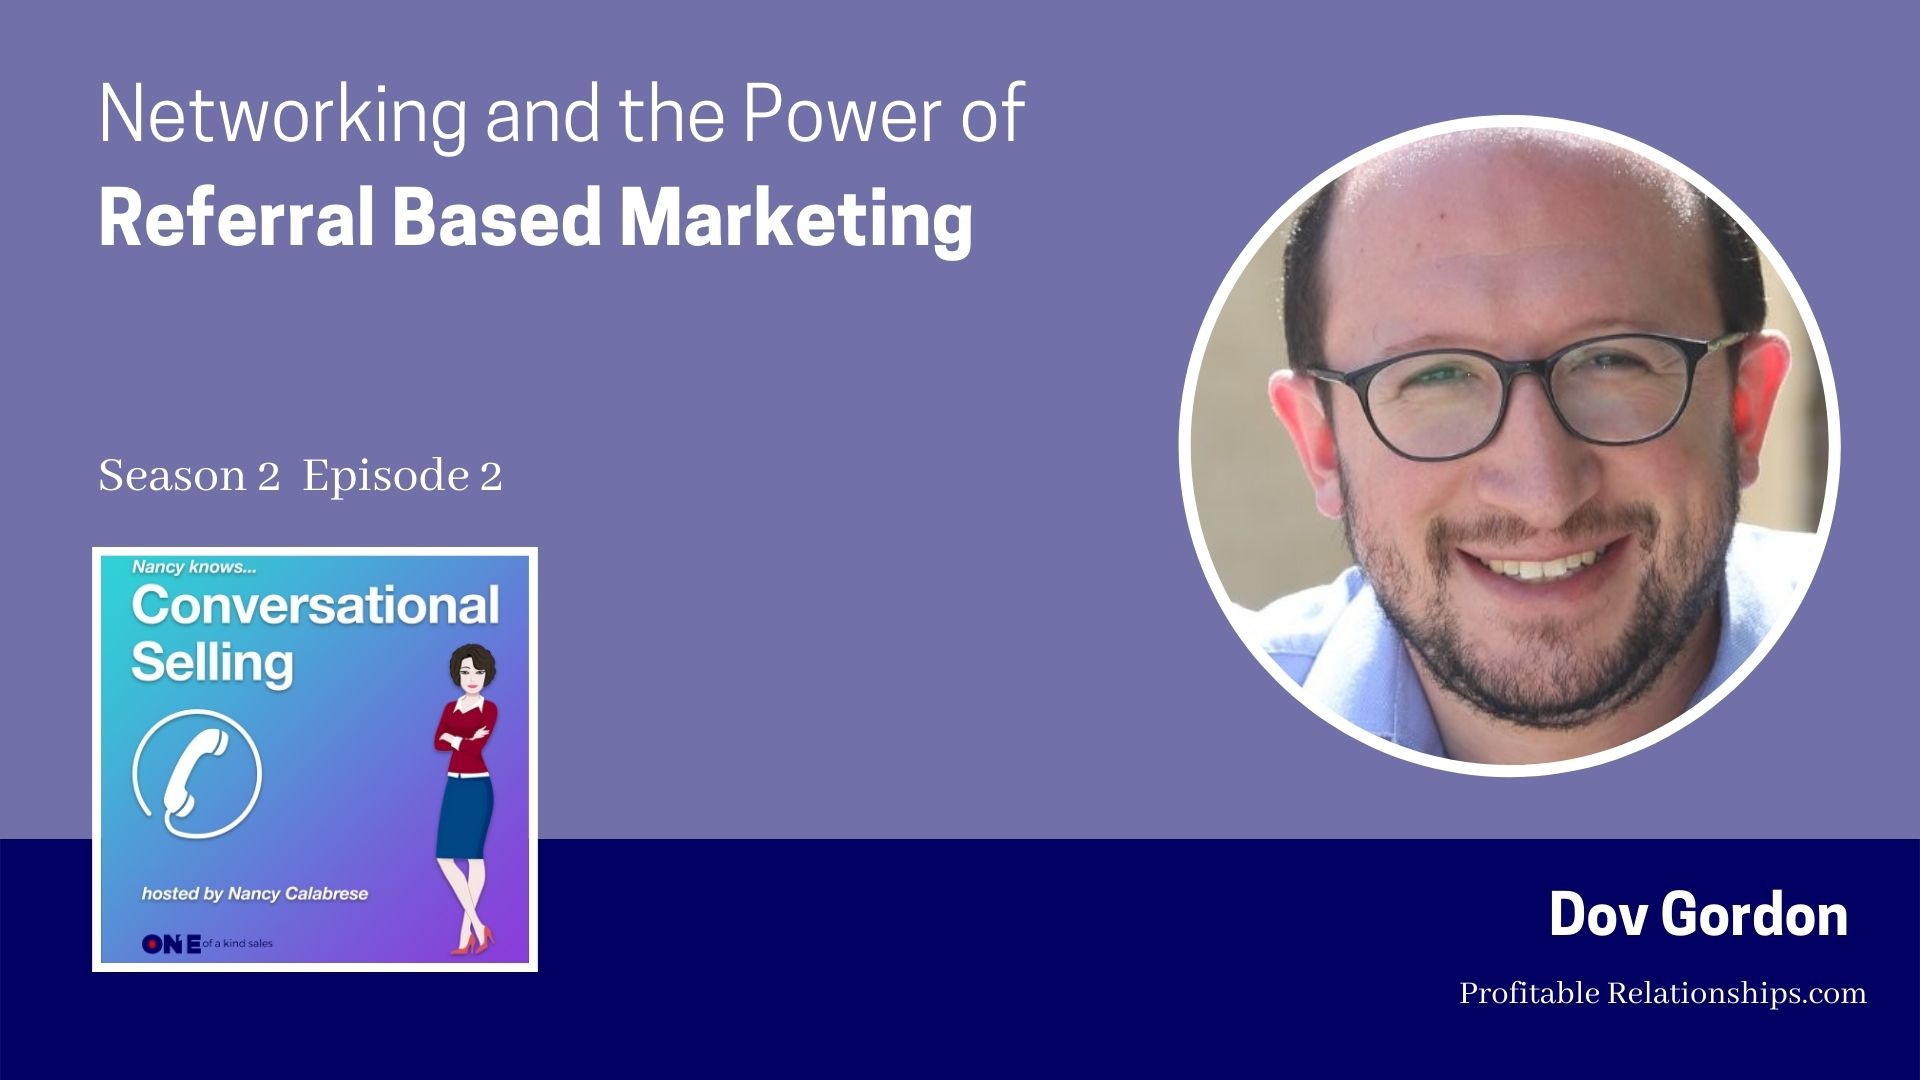 Dov Gordon | Networking and the Power of Referral Based Marketing